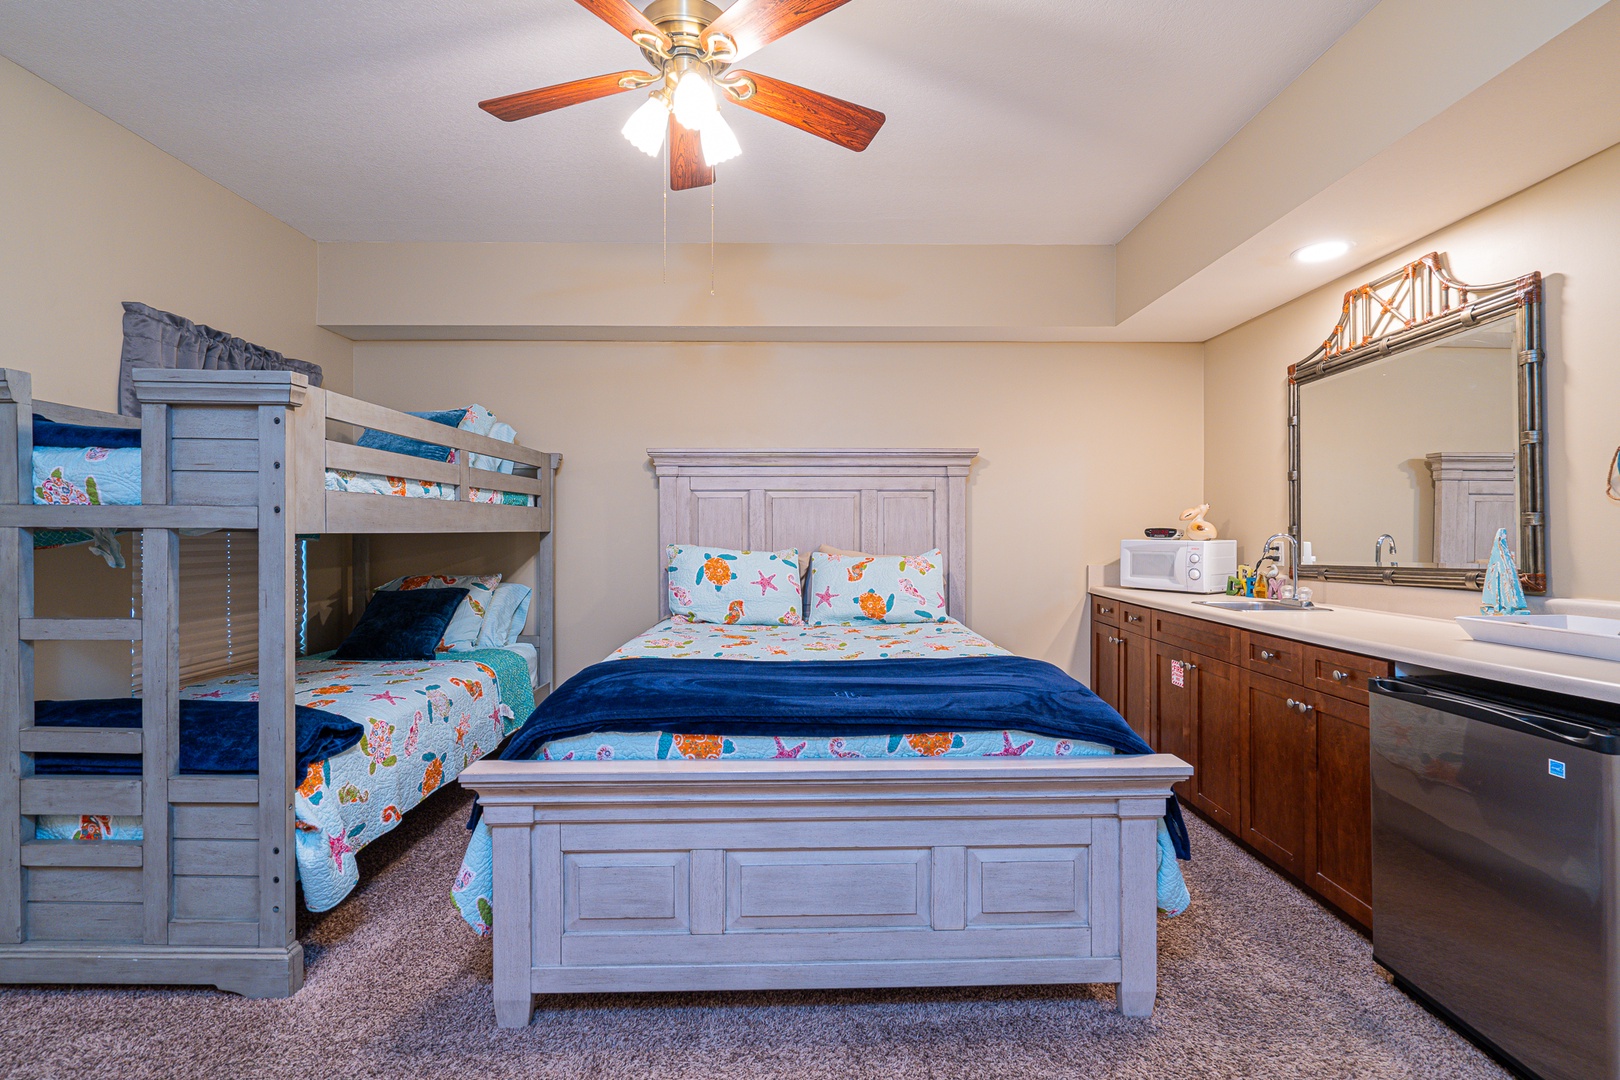 The final suite offers a private ensuite, queen bed, twin bunks, kitchenette, & TV